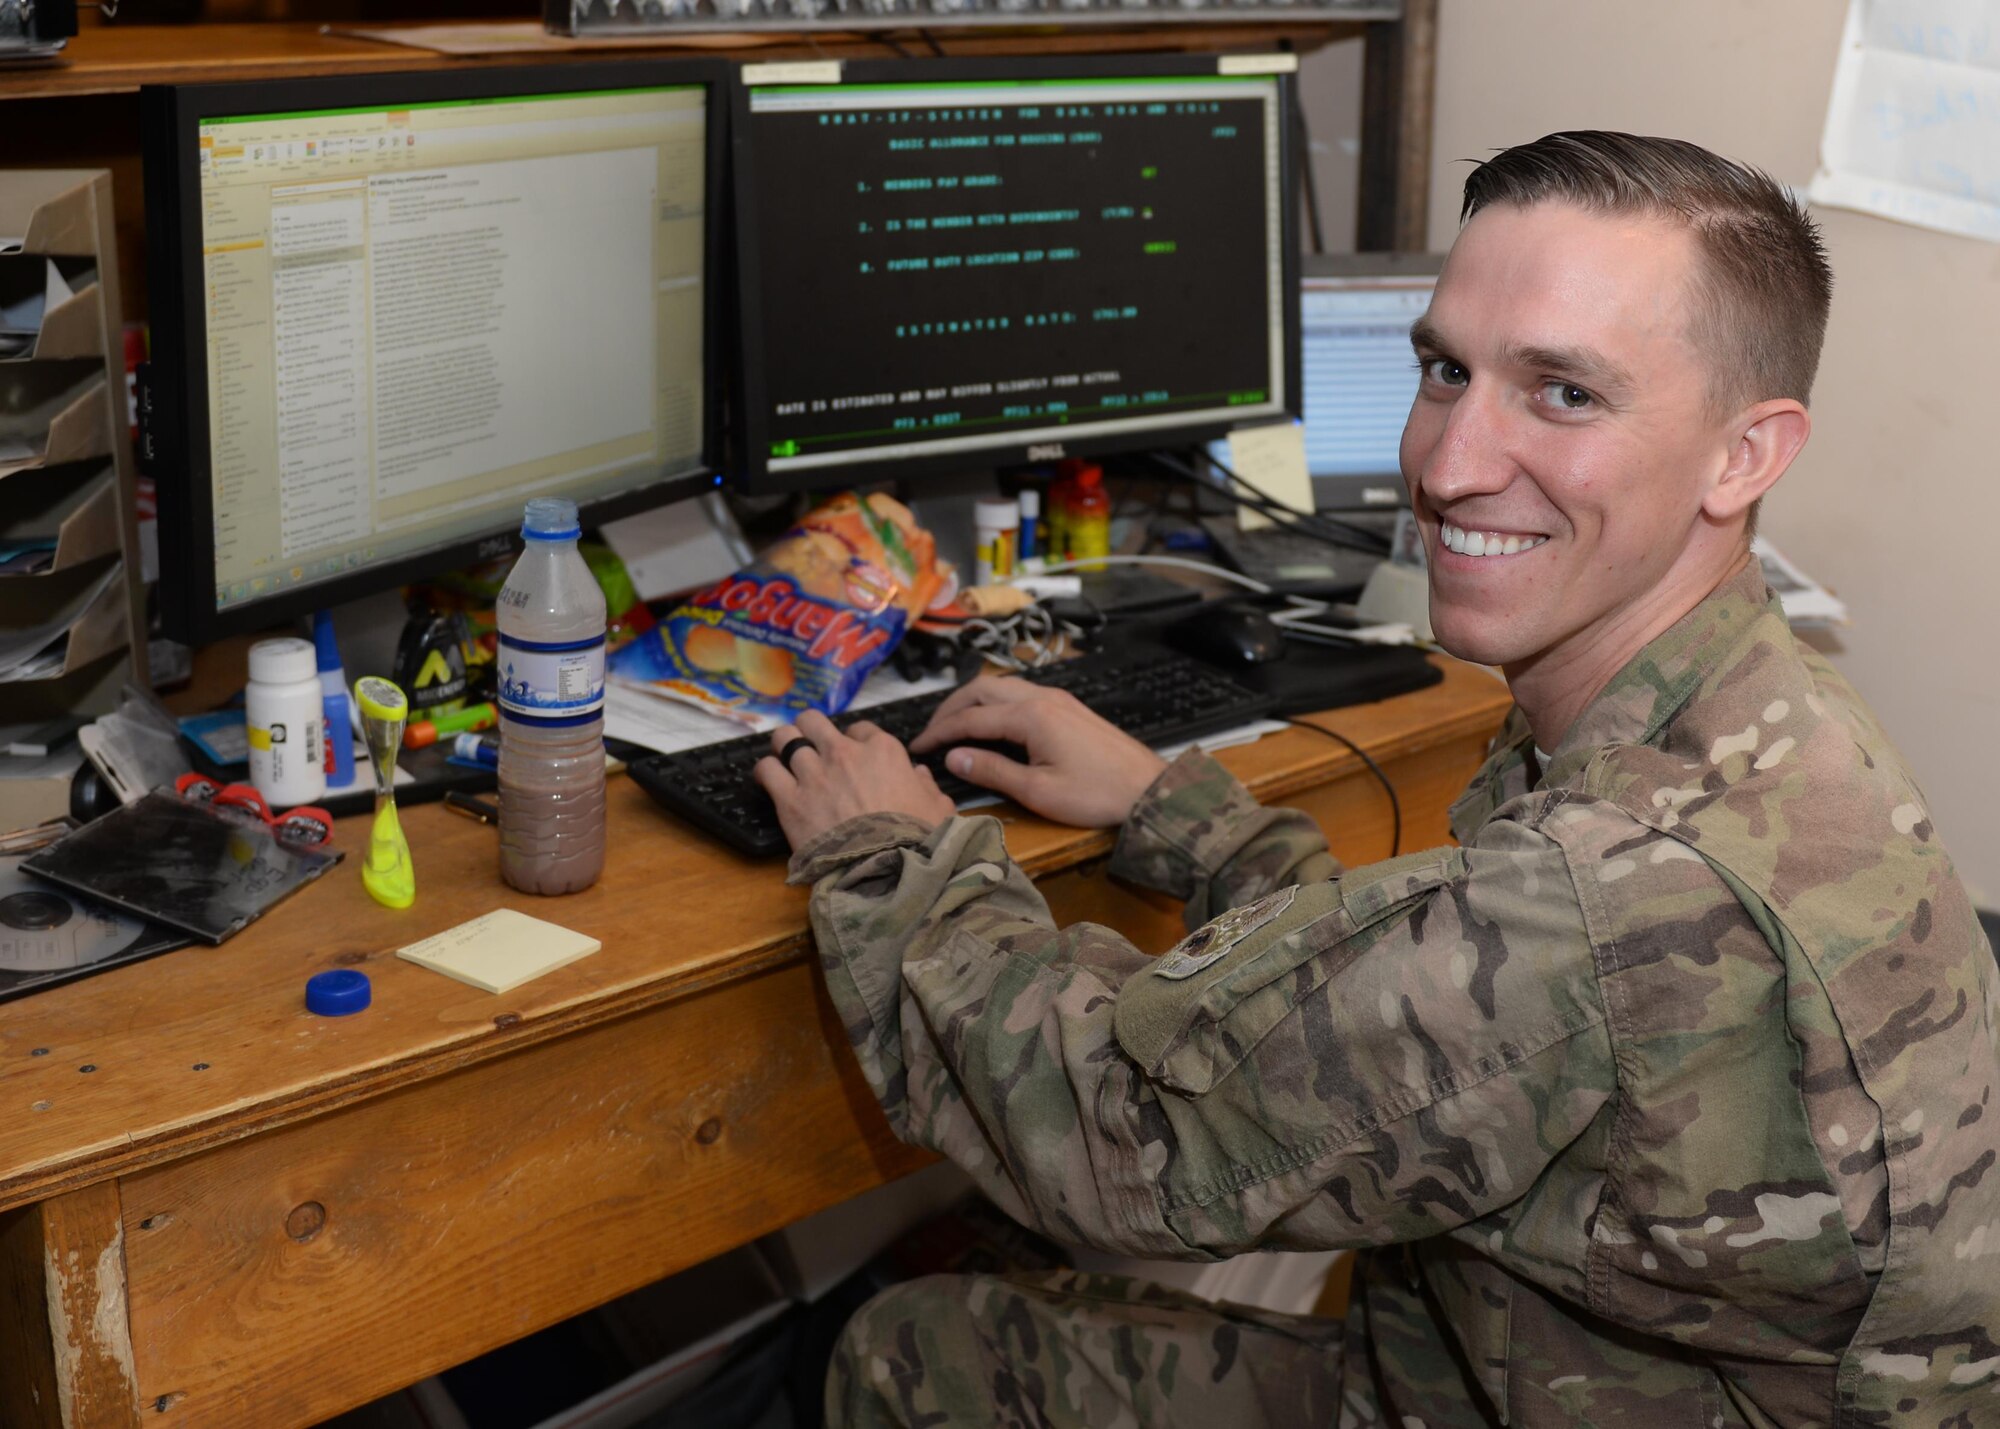 U.S. Air Force Senior Airman Corey Gibson, 455th Air Expeditionary Wing Finance Management customer service technician, pauses for a photo while working June 24, 2015, at Bagram Airfield, Afghanistan. Gibson is the only finance customer service technician in Afghanistan and ensures all Bagram Active Duty, Reserve and Guard Airmen as well as U.S. civilian members are financially set during their deployment here. (U.S. Air Force photo by Senior Airman Corey Gibson/Released)